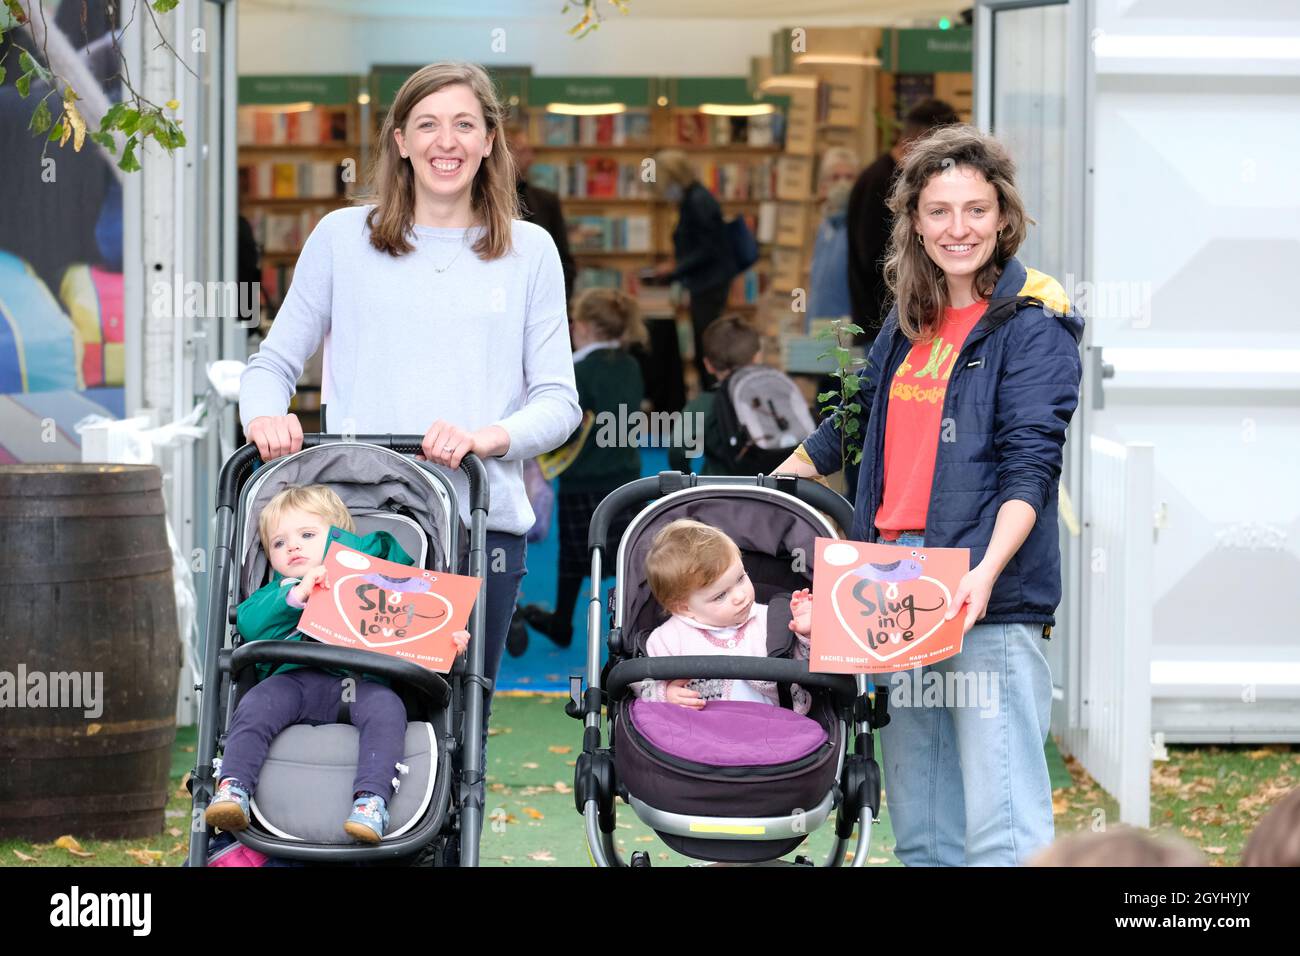 Cheltenham Literature Festival, Cheltenham, UK - Friday 8th October 2021 - Young visitors show off their picture books on the opening day of the Cheltenham Literature Festival - the Festival runs for 10 days. Photo Steven May / Alamy Live News Stock Photo